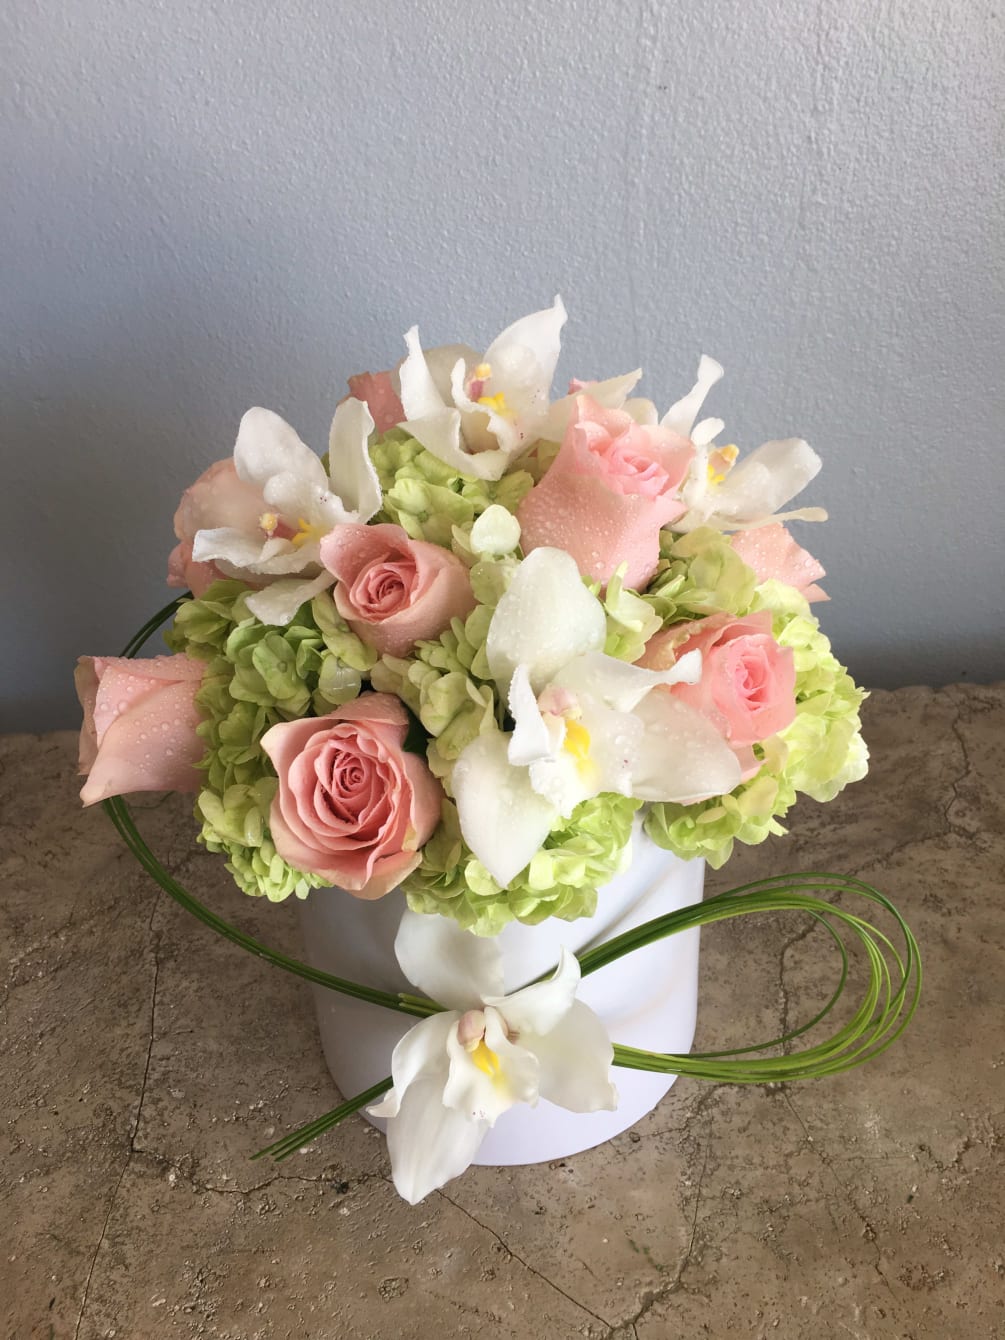 High style design with whites, greens, peach featuring cymbidium, hydrangea and roses.